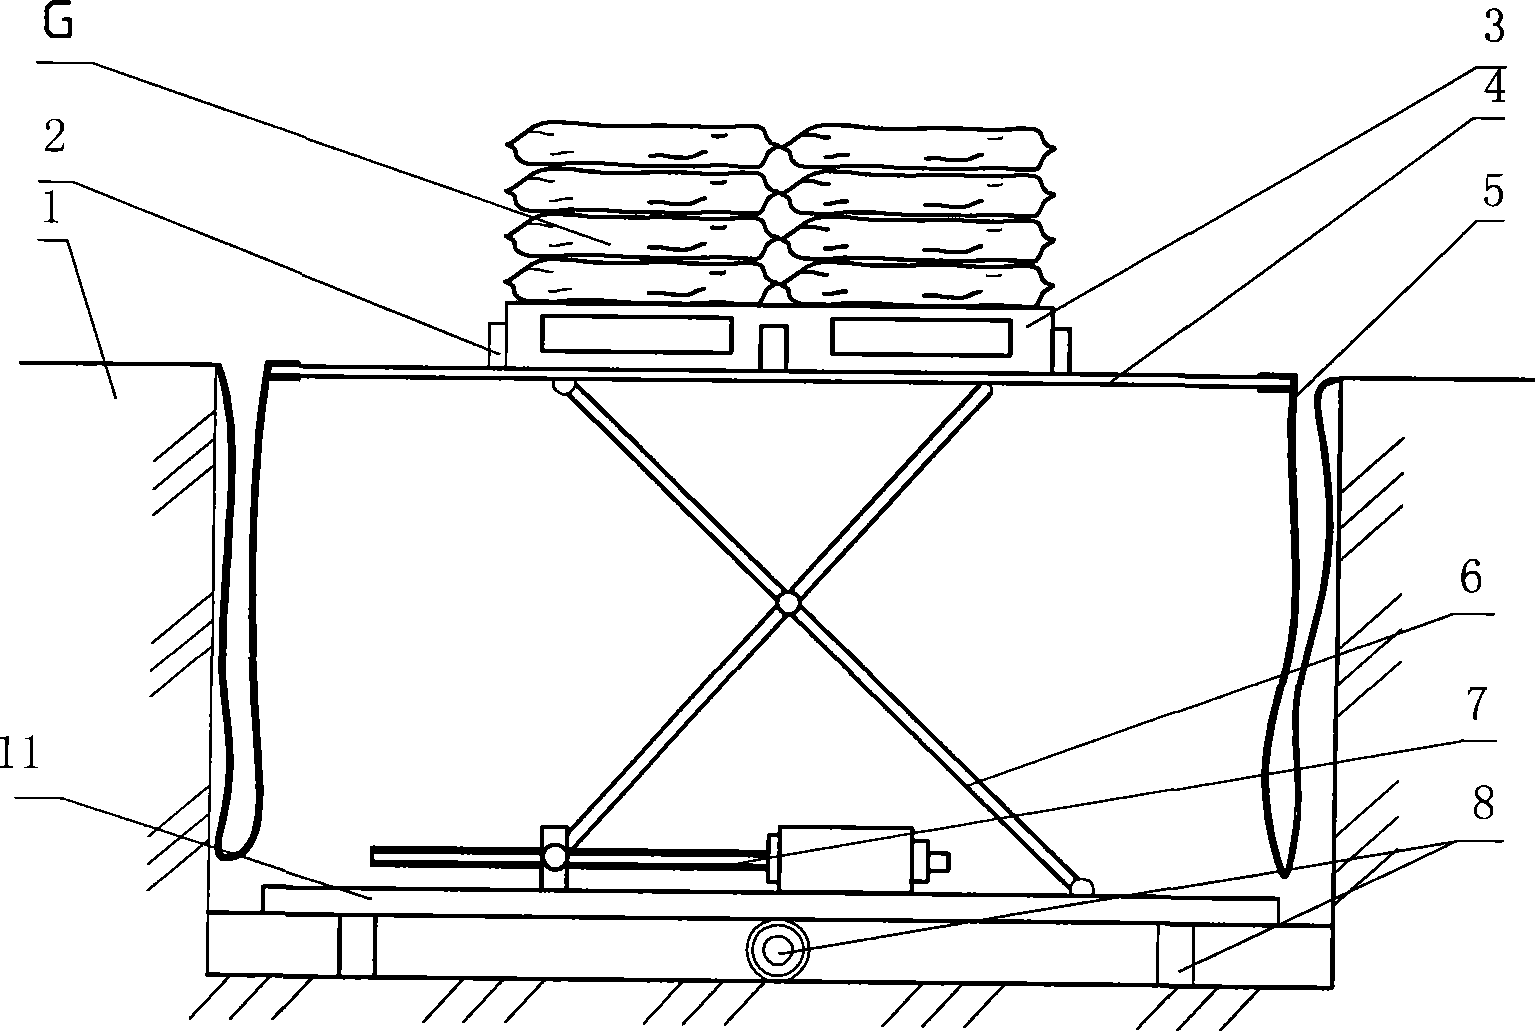 Plate stacking device for bagged materials